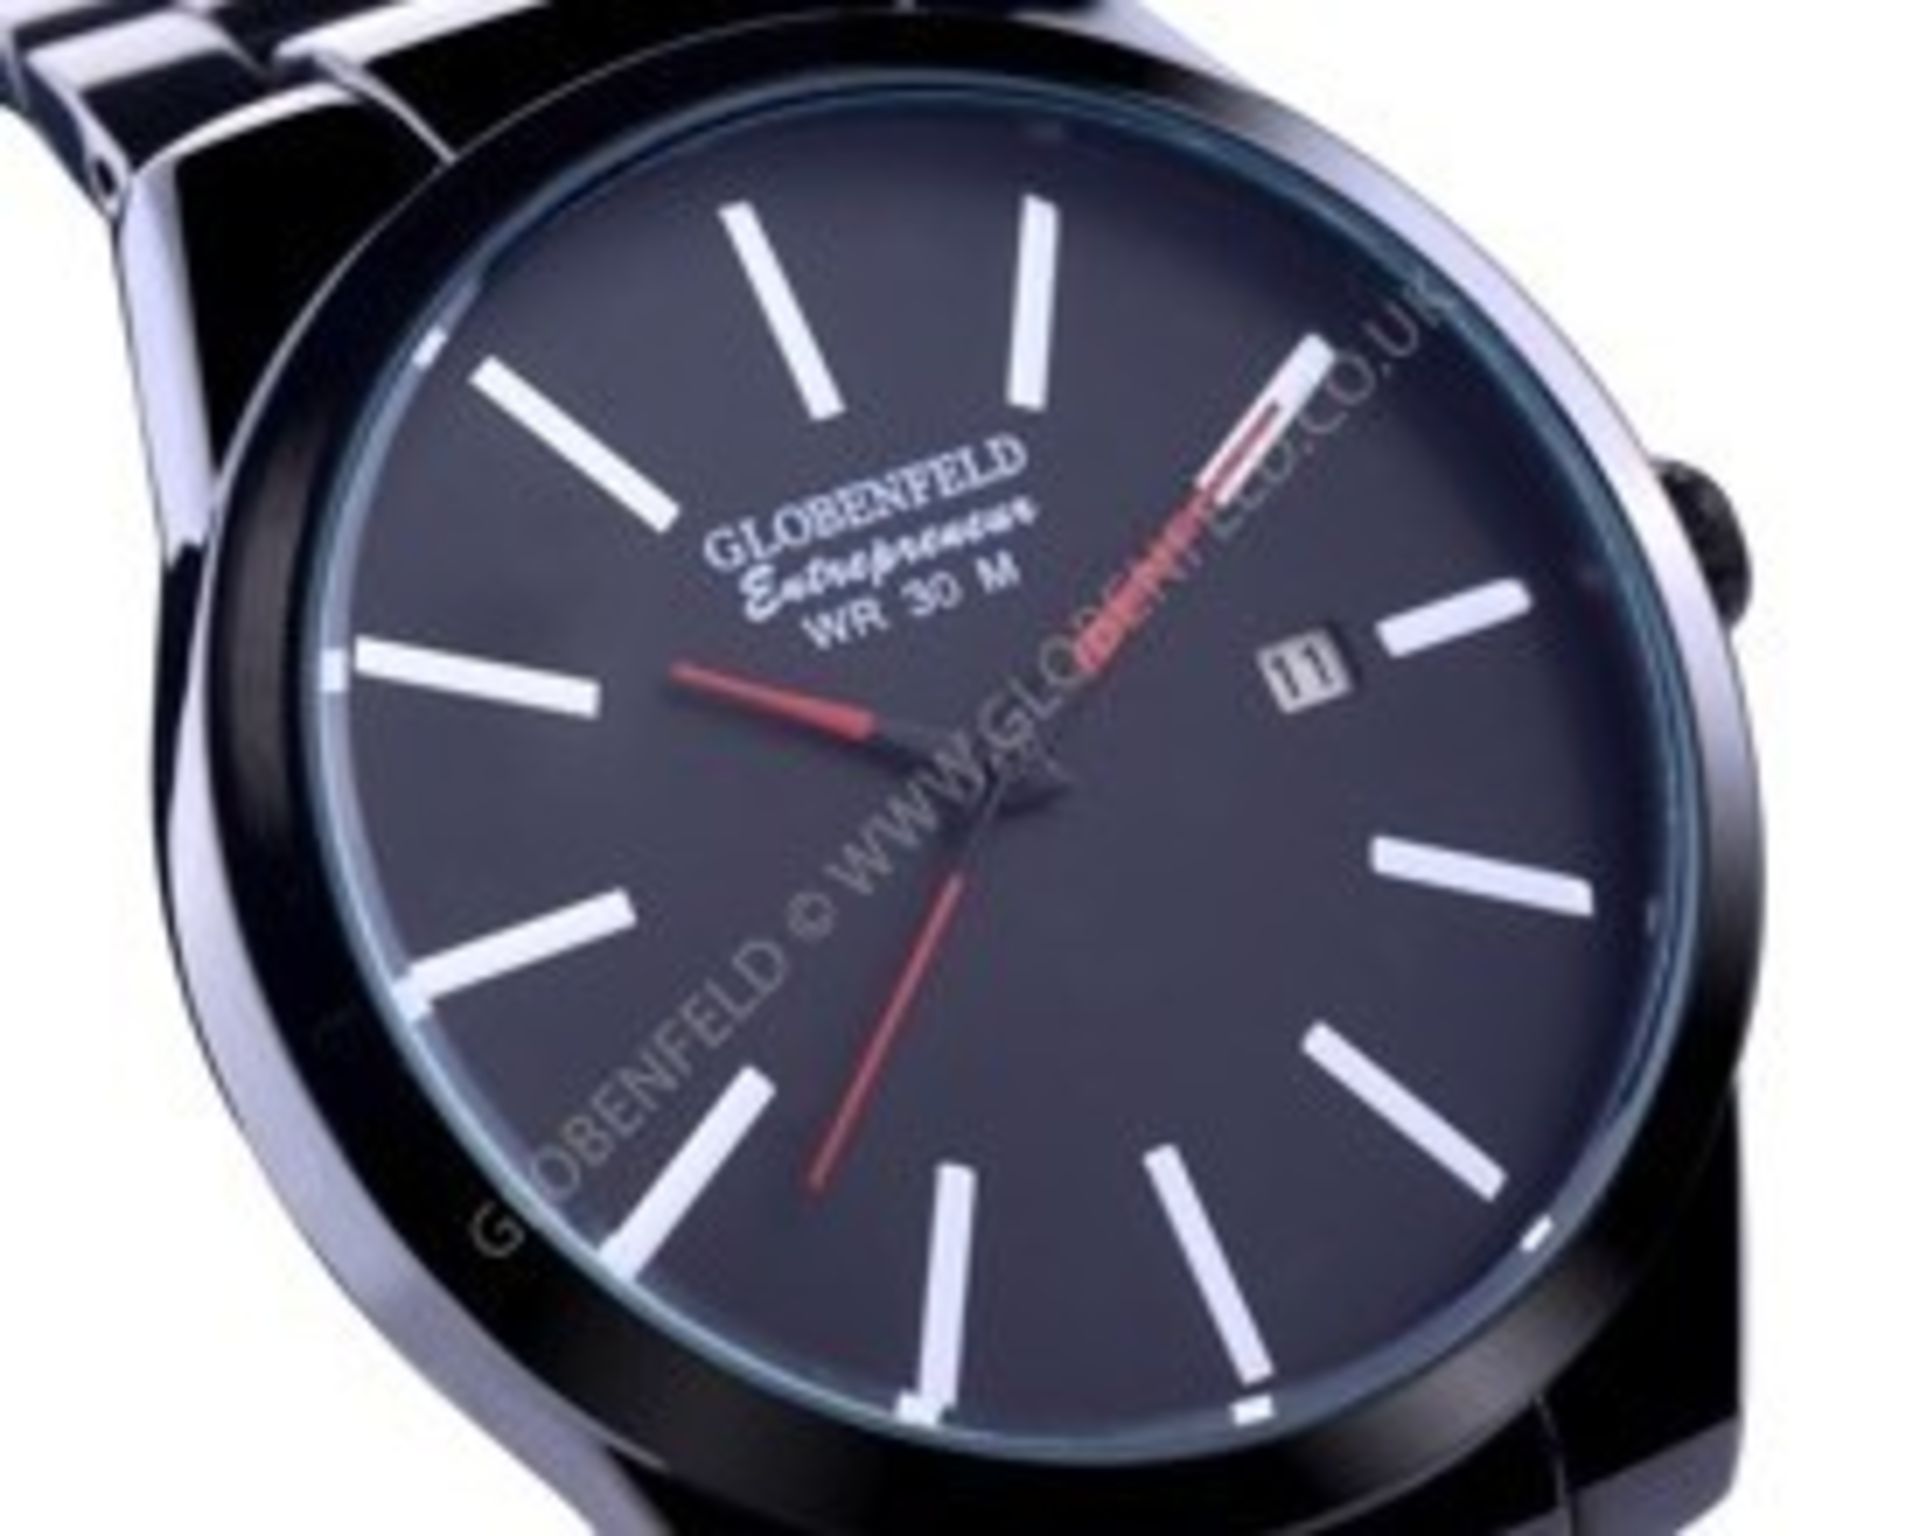 V *TRADE QTY* Brand New Gents Globenfeld Entrepreneur Watch RRP 325 With Box - Warranty - Papers Etc